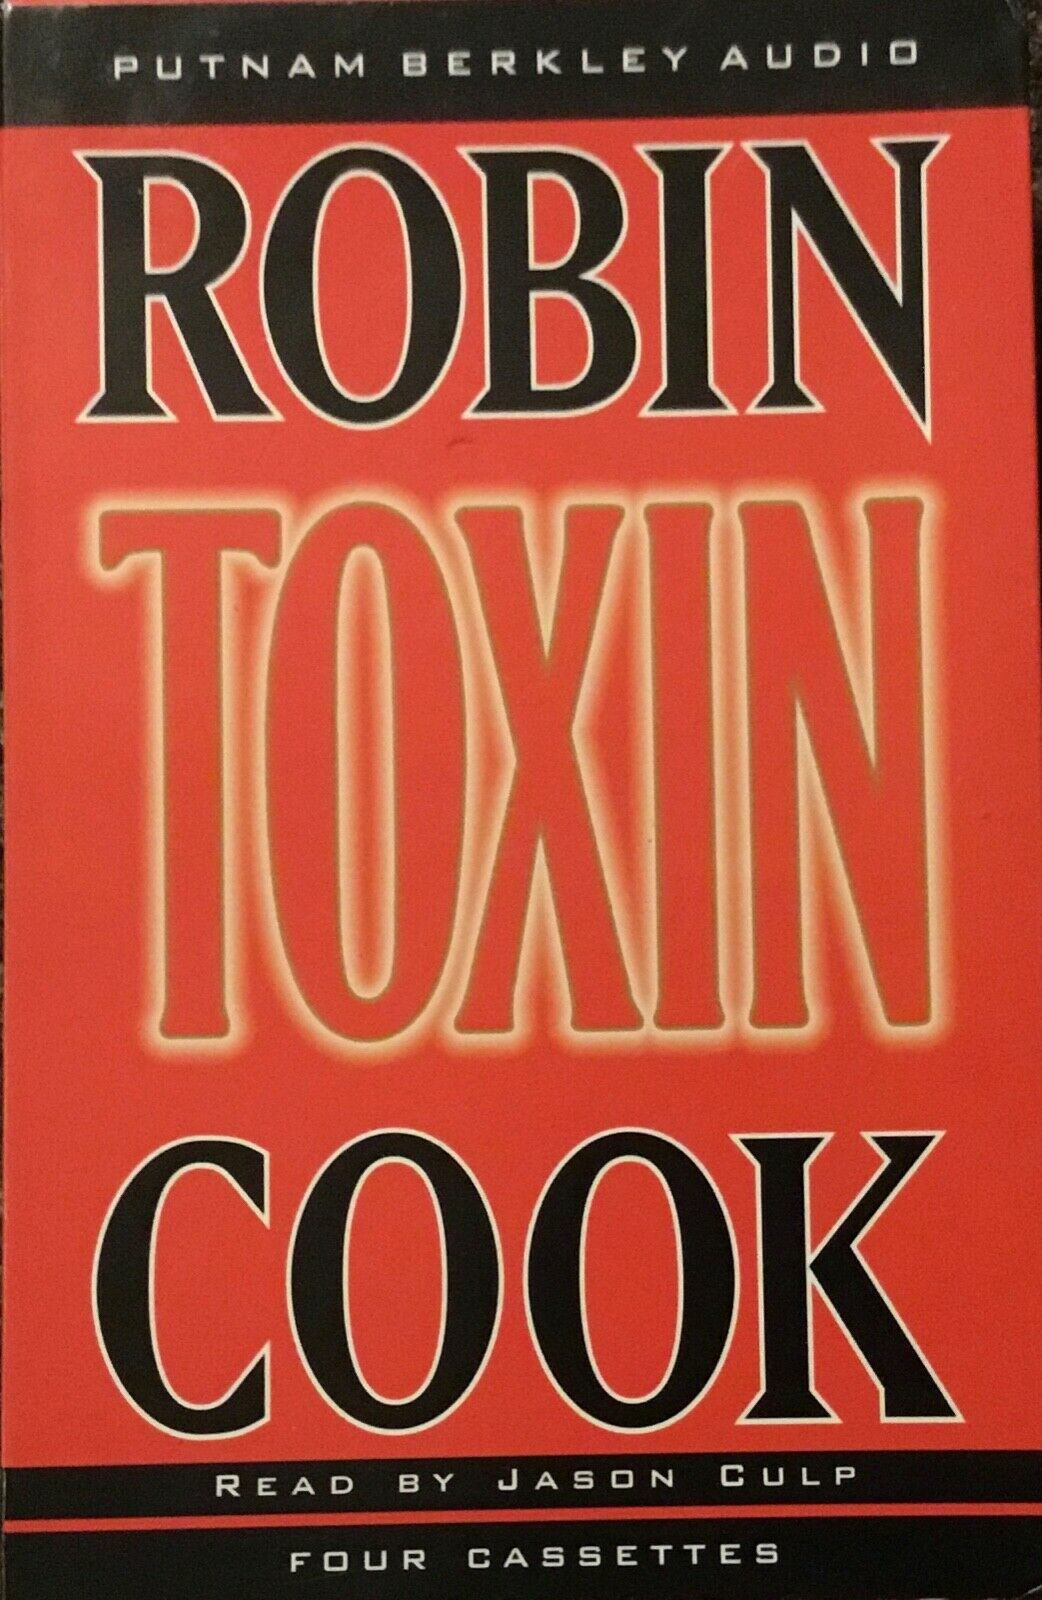 Toxin by robin cook free. download full